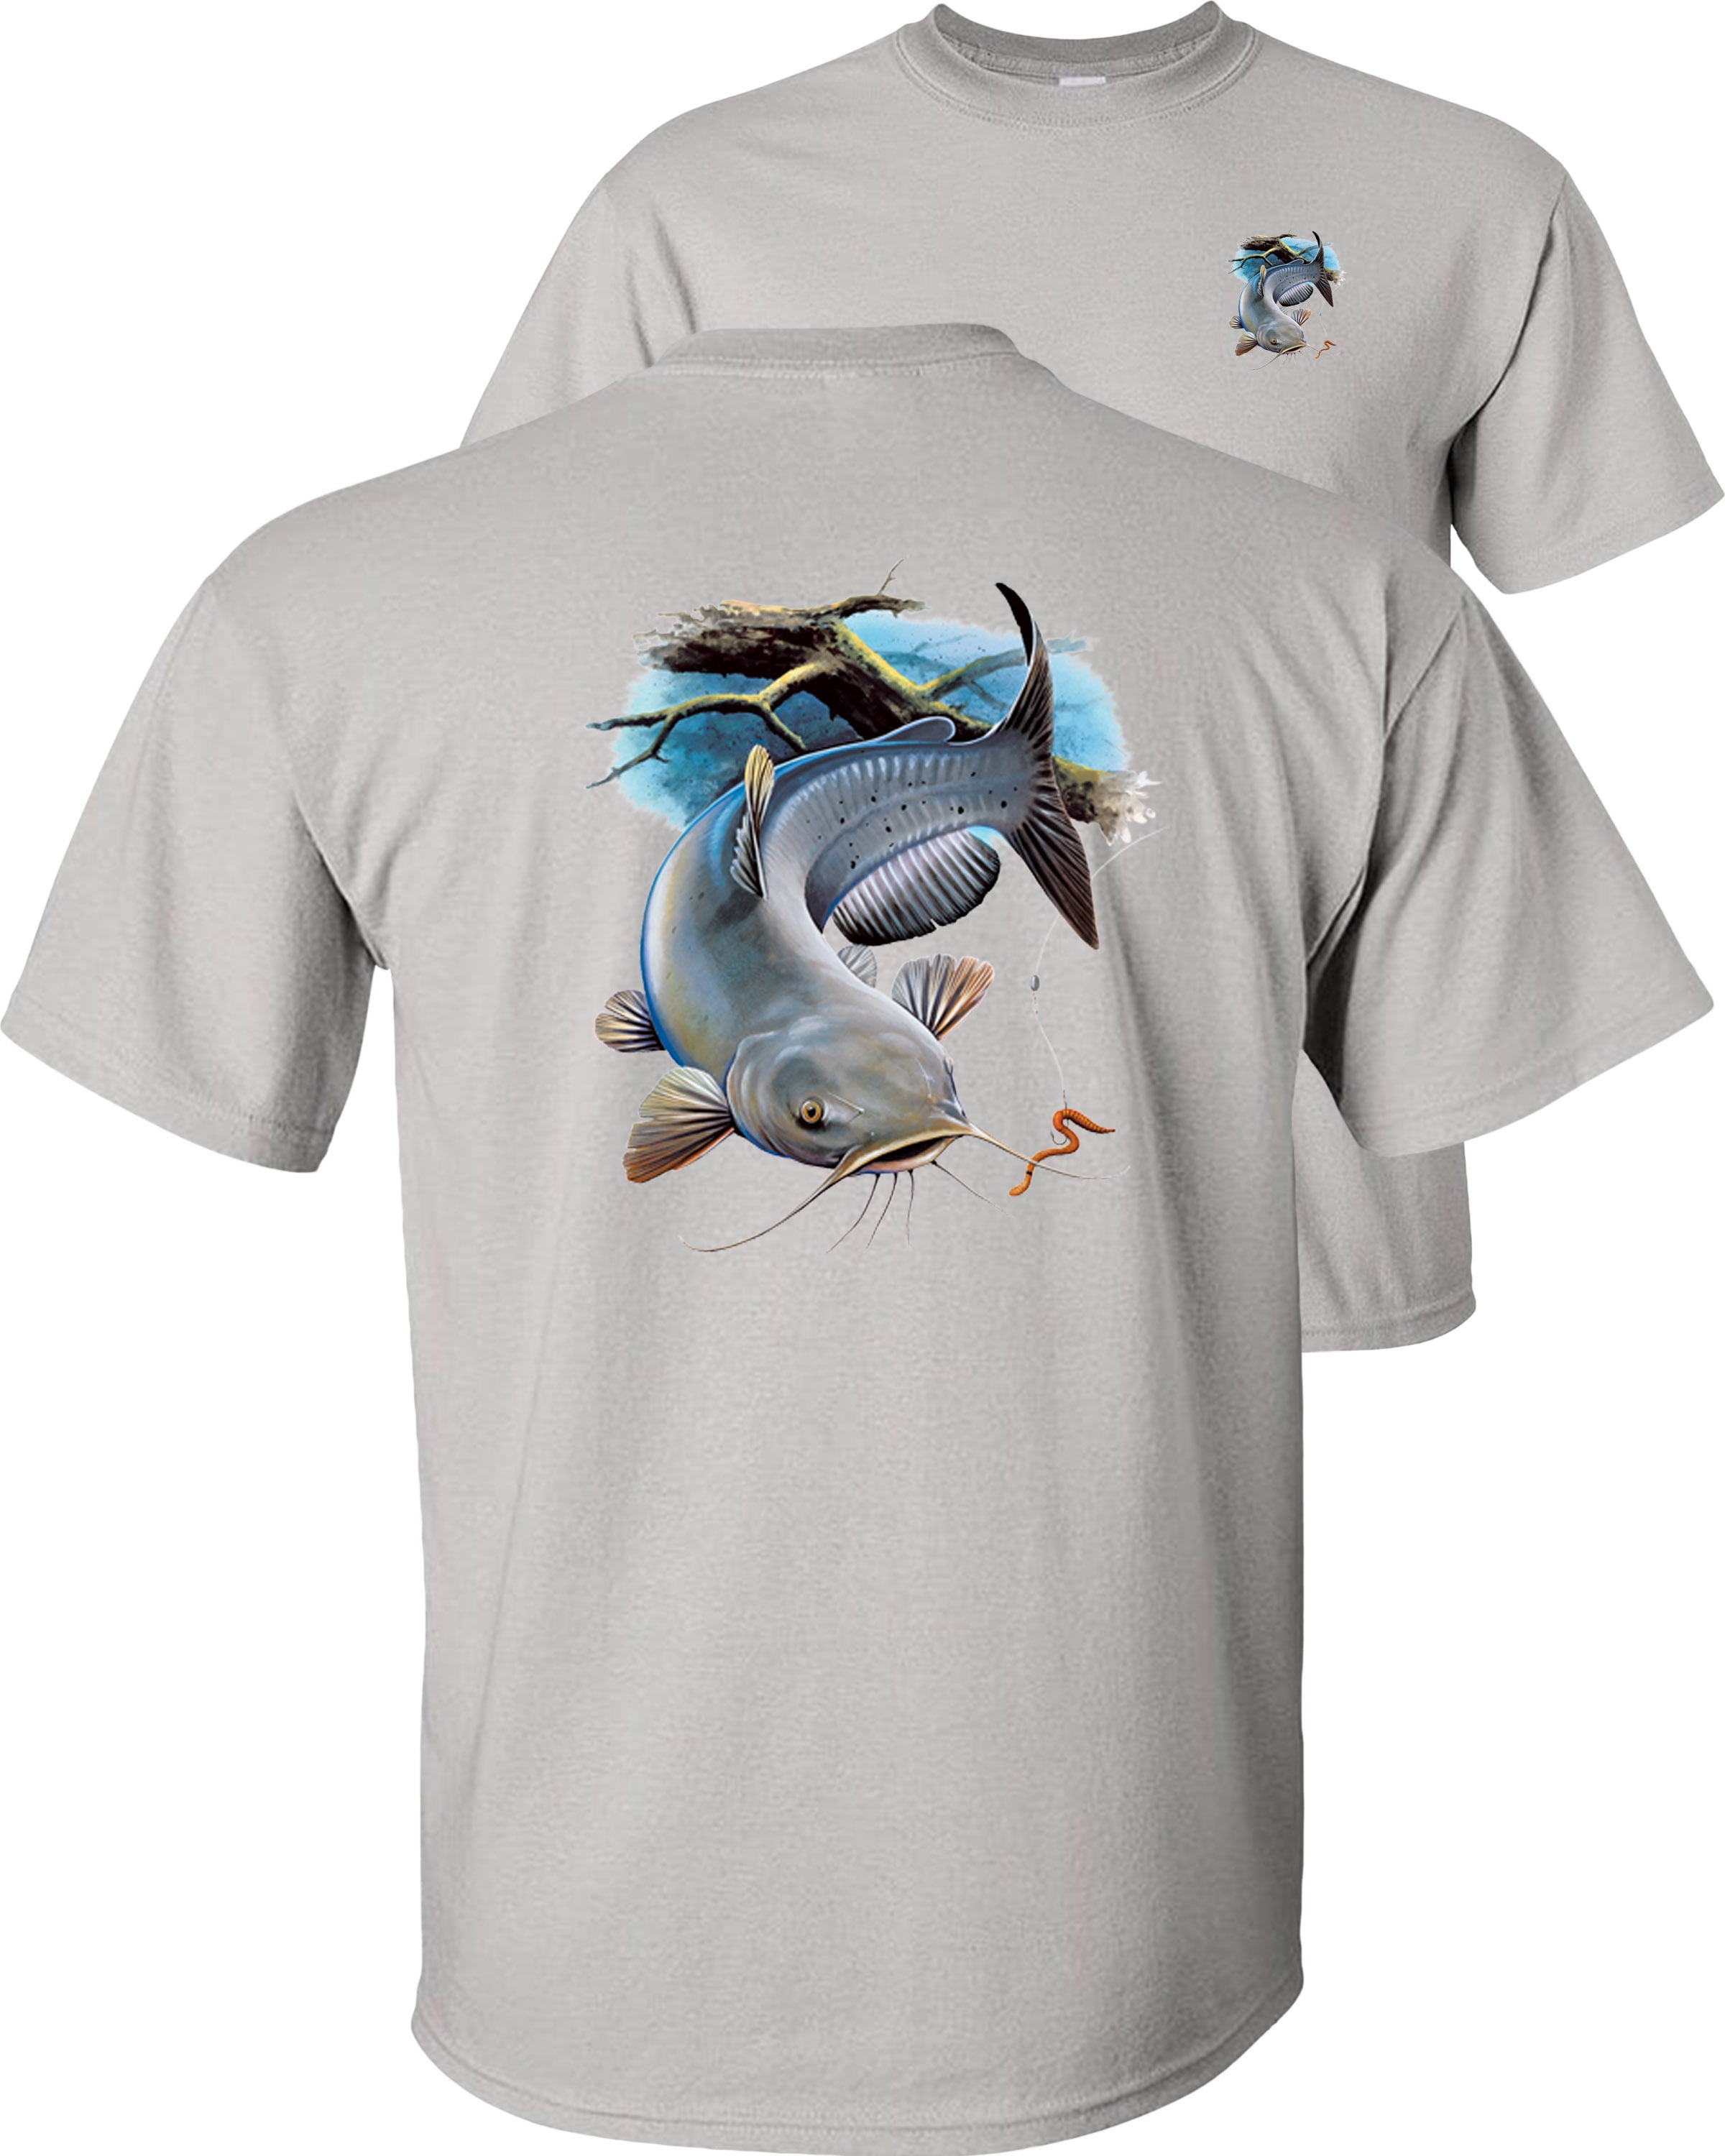 Grey-M Graphic Fair Fishing Blue Catfish Tee-Ice River T-Shirt, Channel, Game